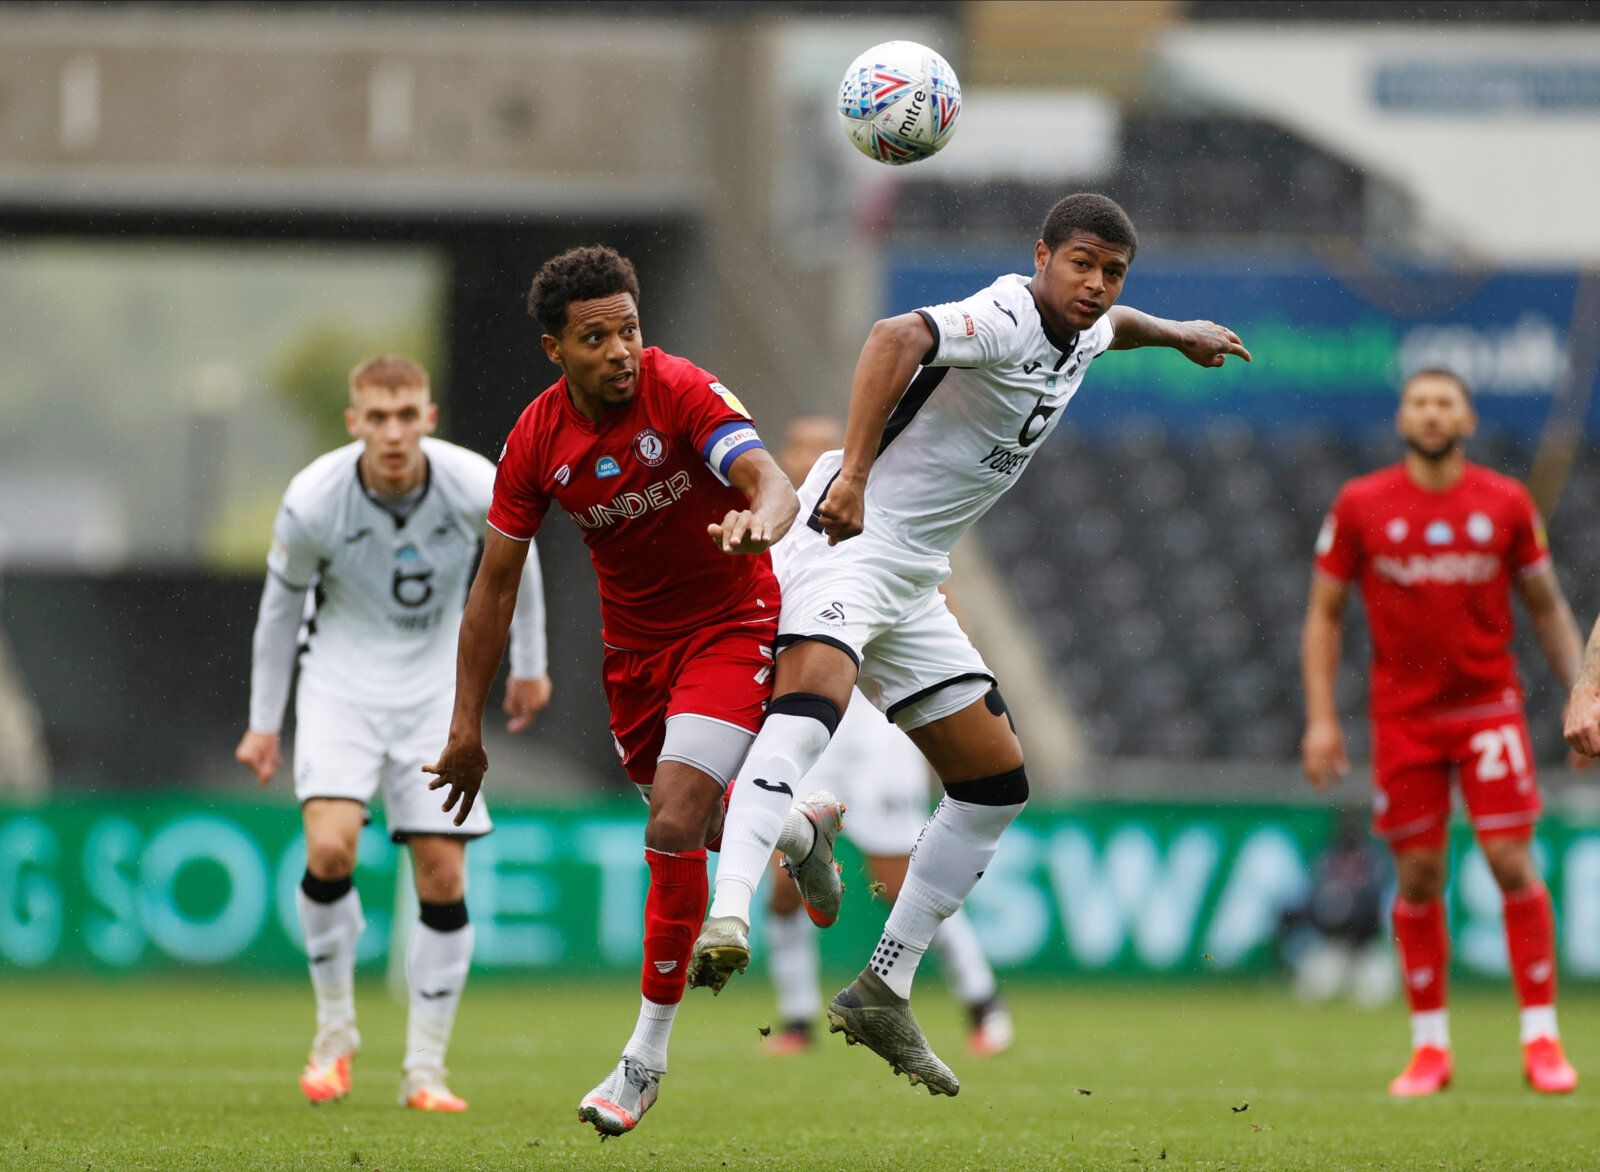 Soccer Football - Championship - Swansea City v Bristol City - Liberty Stadium, Swansea, Britain - July 18, 2020  Bristol City's Korey Smith in action with Swansea City's Rhian Brewster, as play resumes behind closed doors following the outbreak of the coronavirus disease (COVID-19)  Action Images/John Sibley  EDITORIAL USE ONLY. No use with unauthorized audio, video, data, fixture lists, club/league logos or 